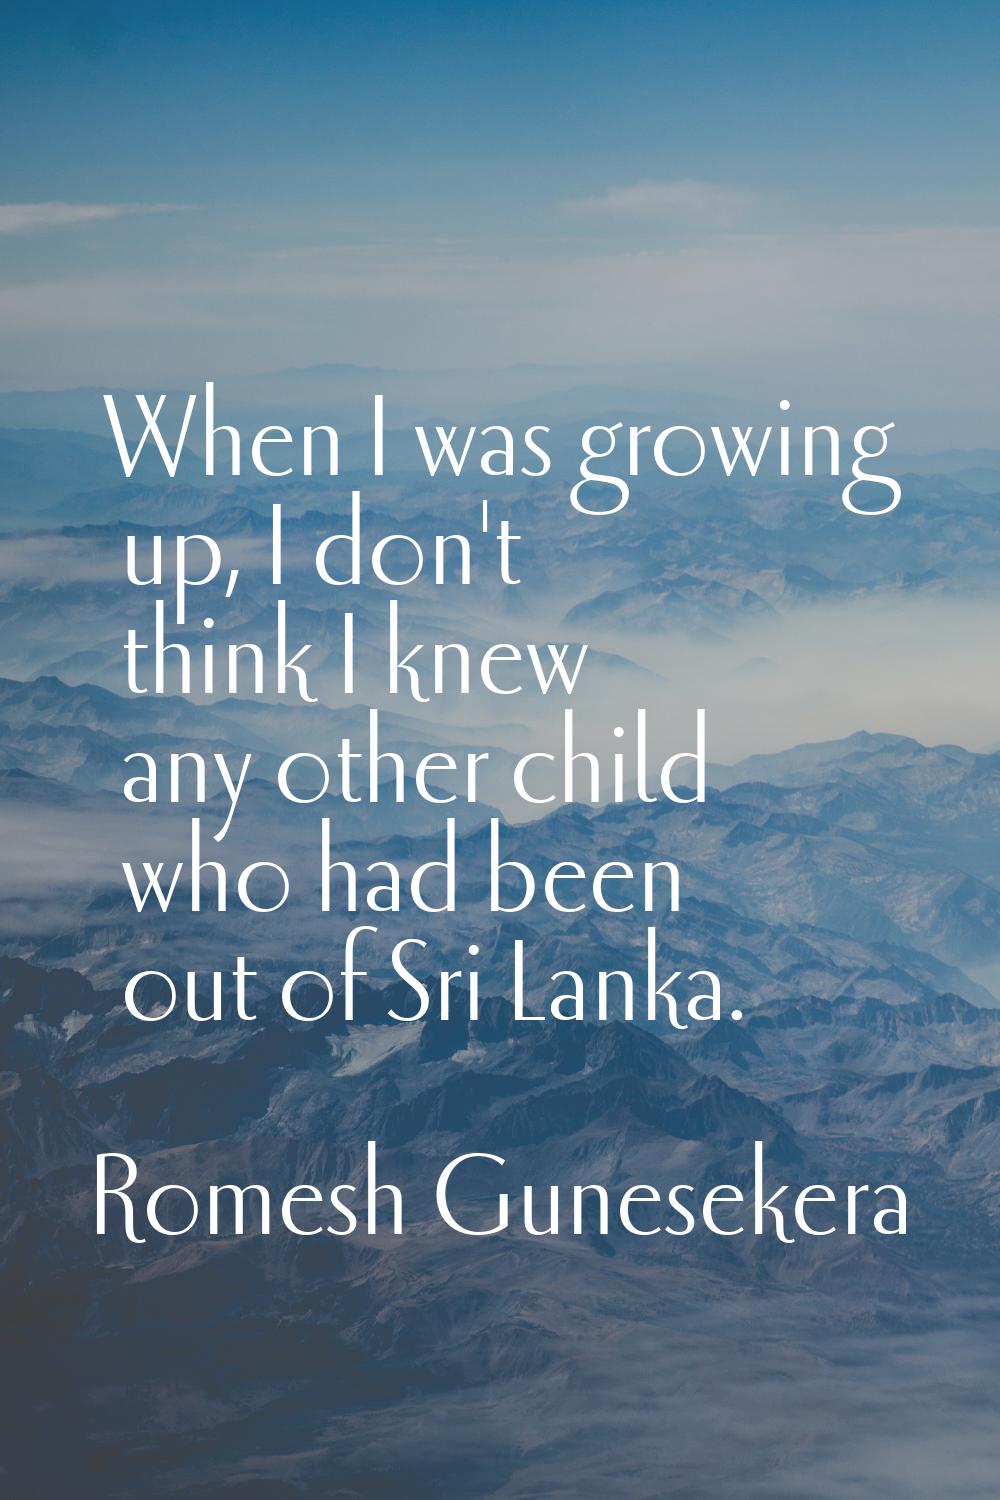 When I was growing up, I don't think I knew any other child who had been out of Sri Lanka.